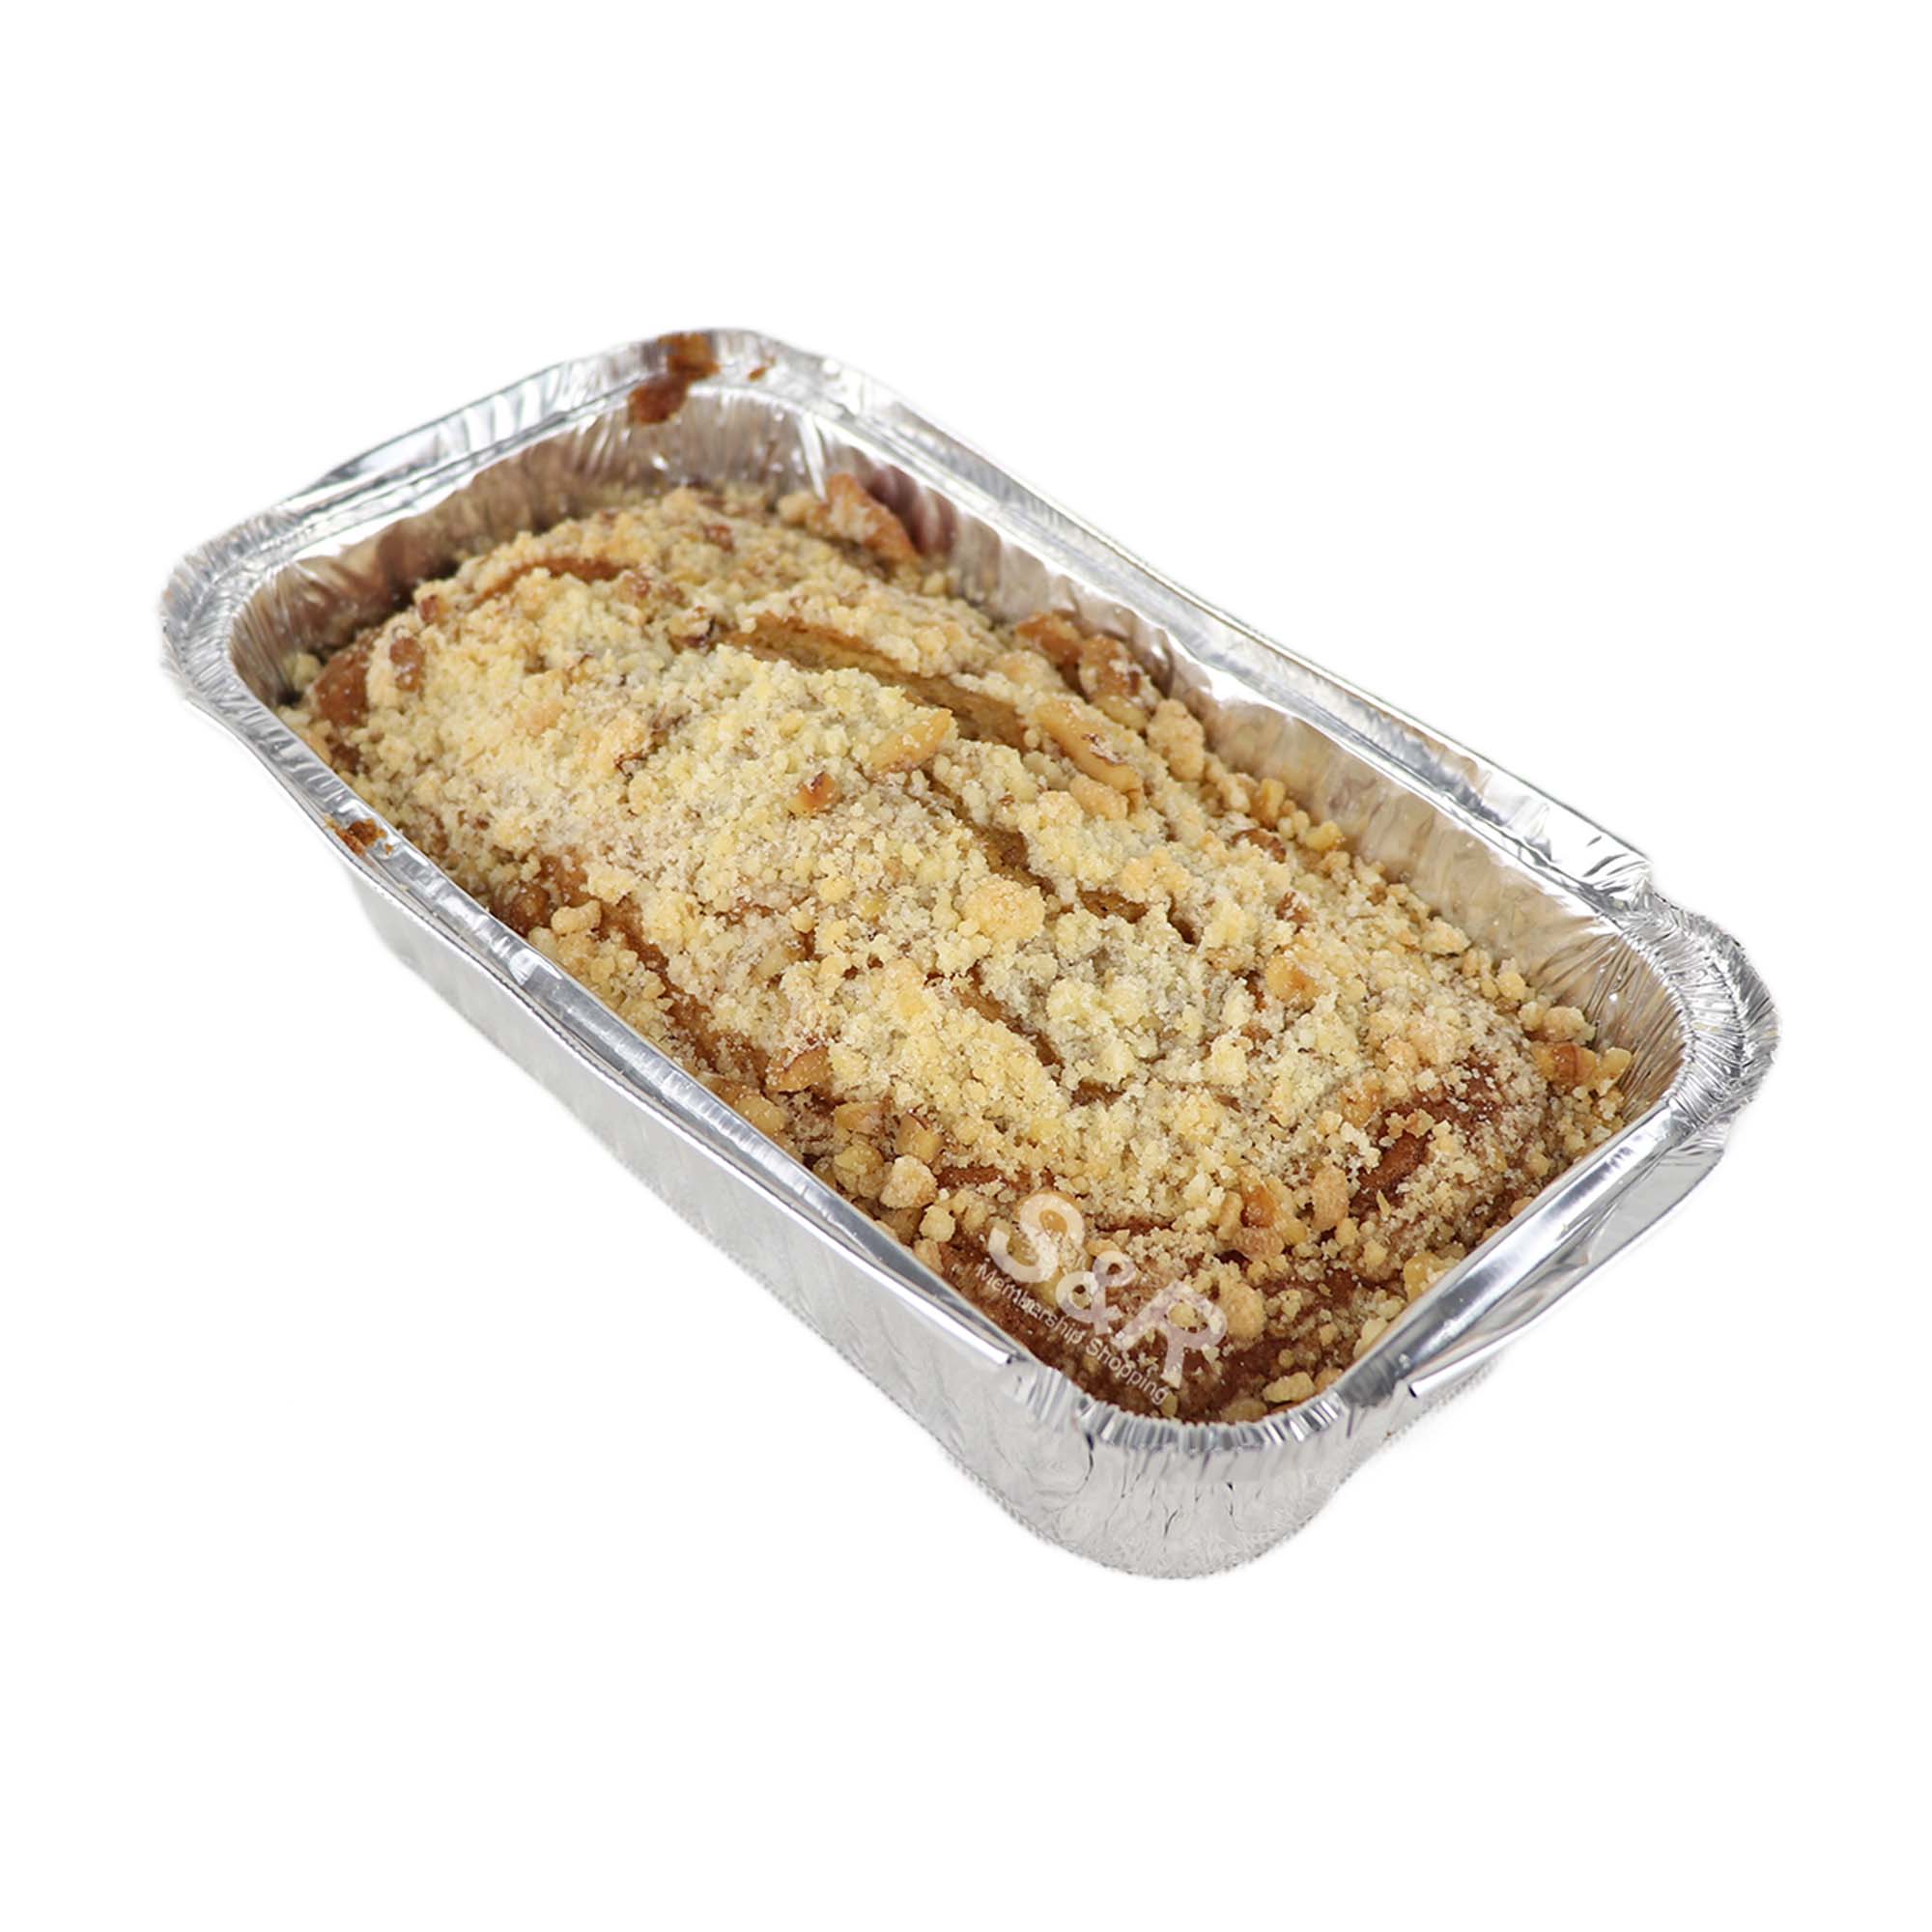 S&R Banapple Loaf 1pc